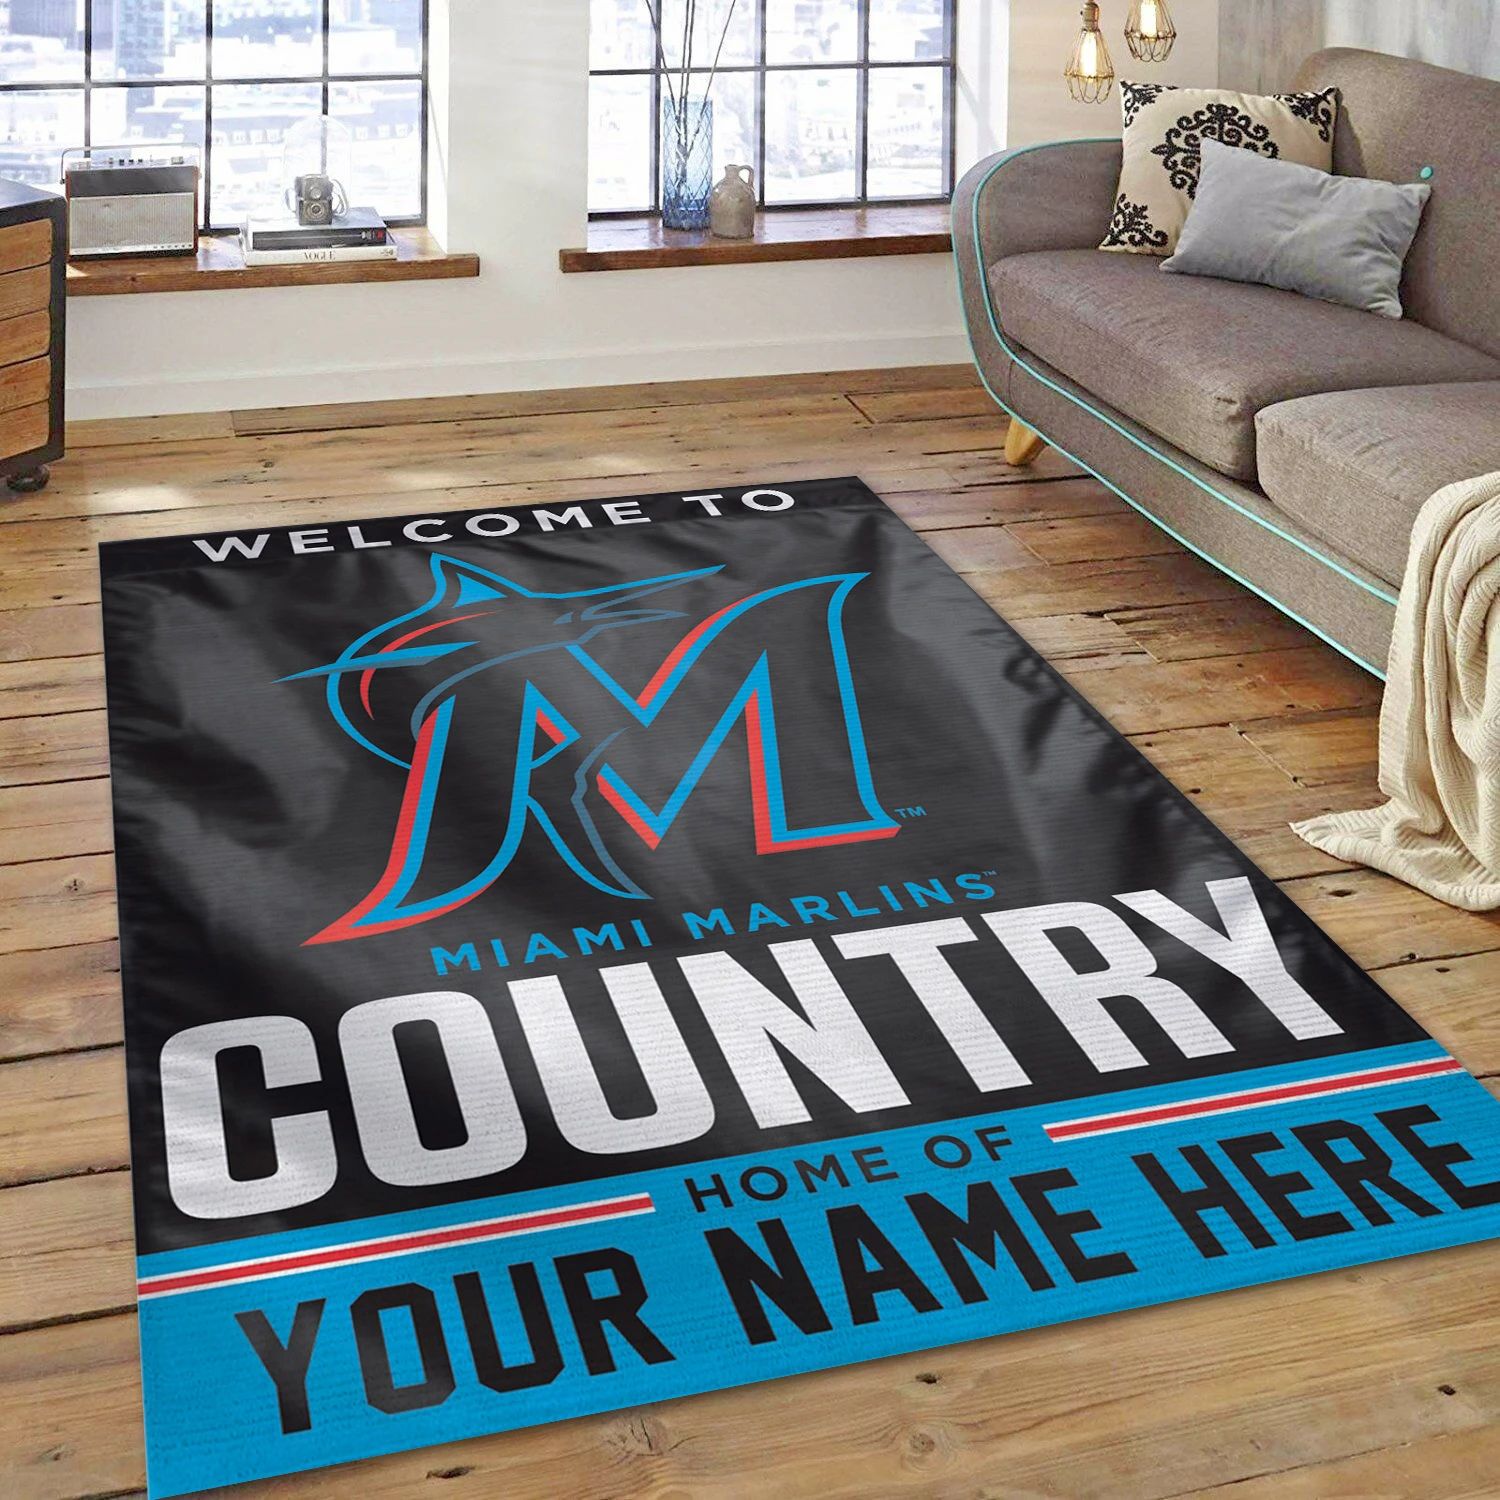 Miami Marlins Personalized MLB Area Rug, Living Room Rug - Home Decor - Indoor Outdoor Rugs